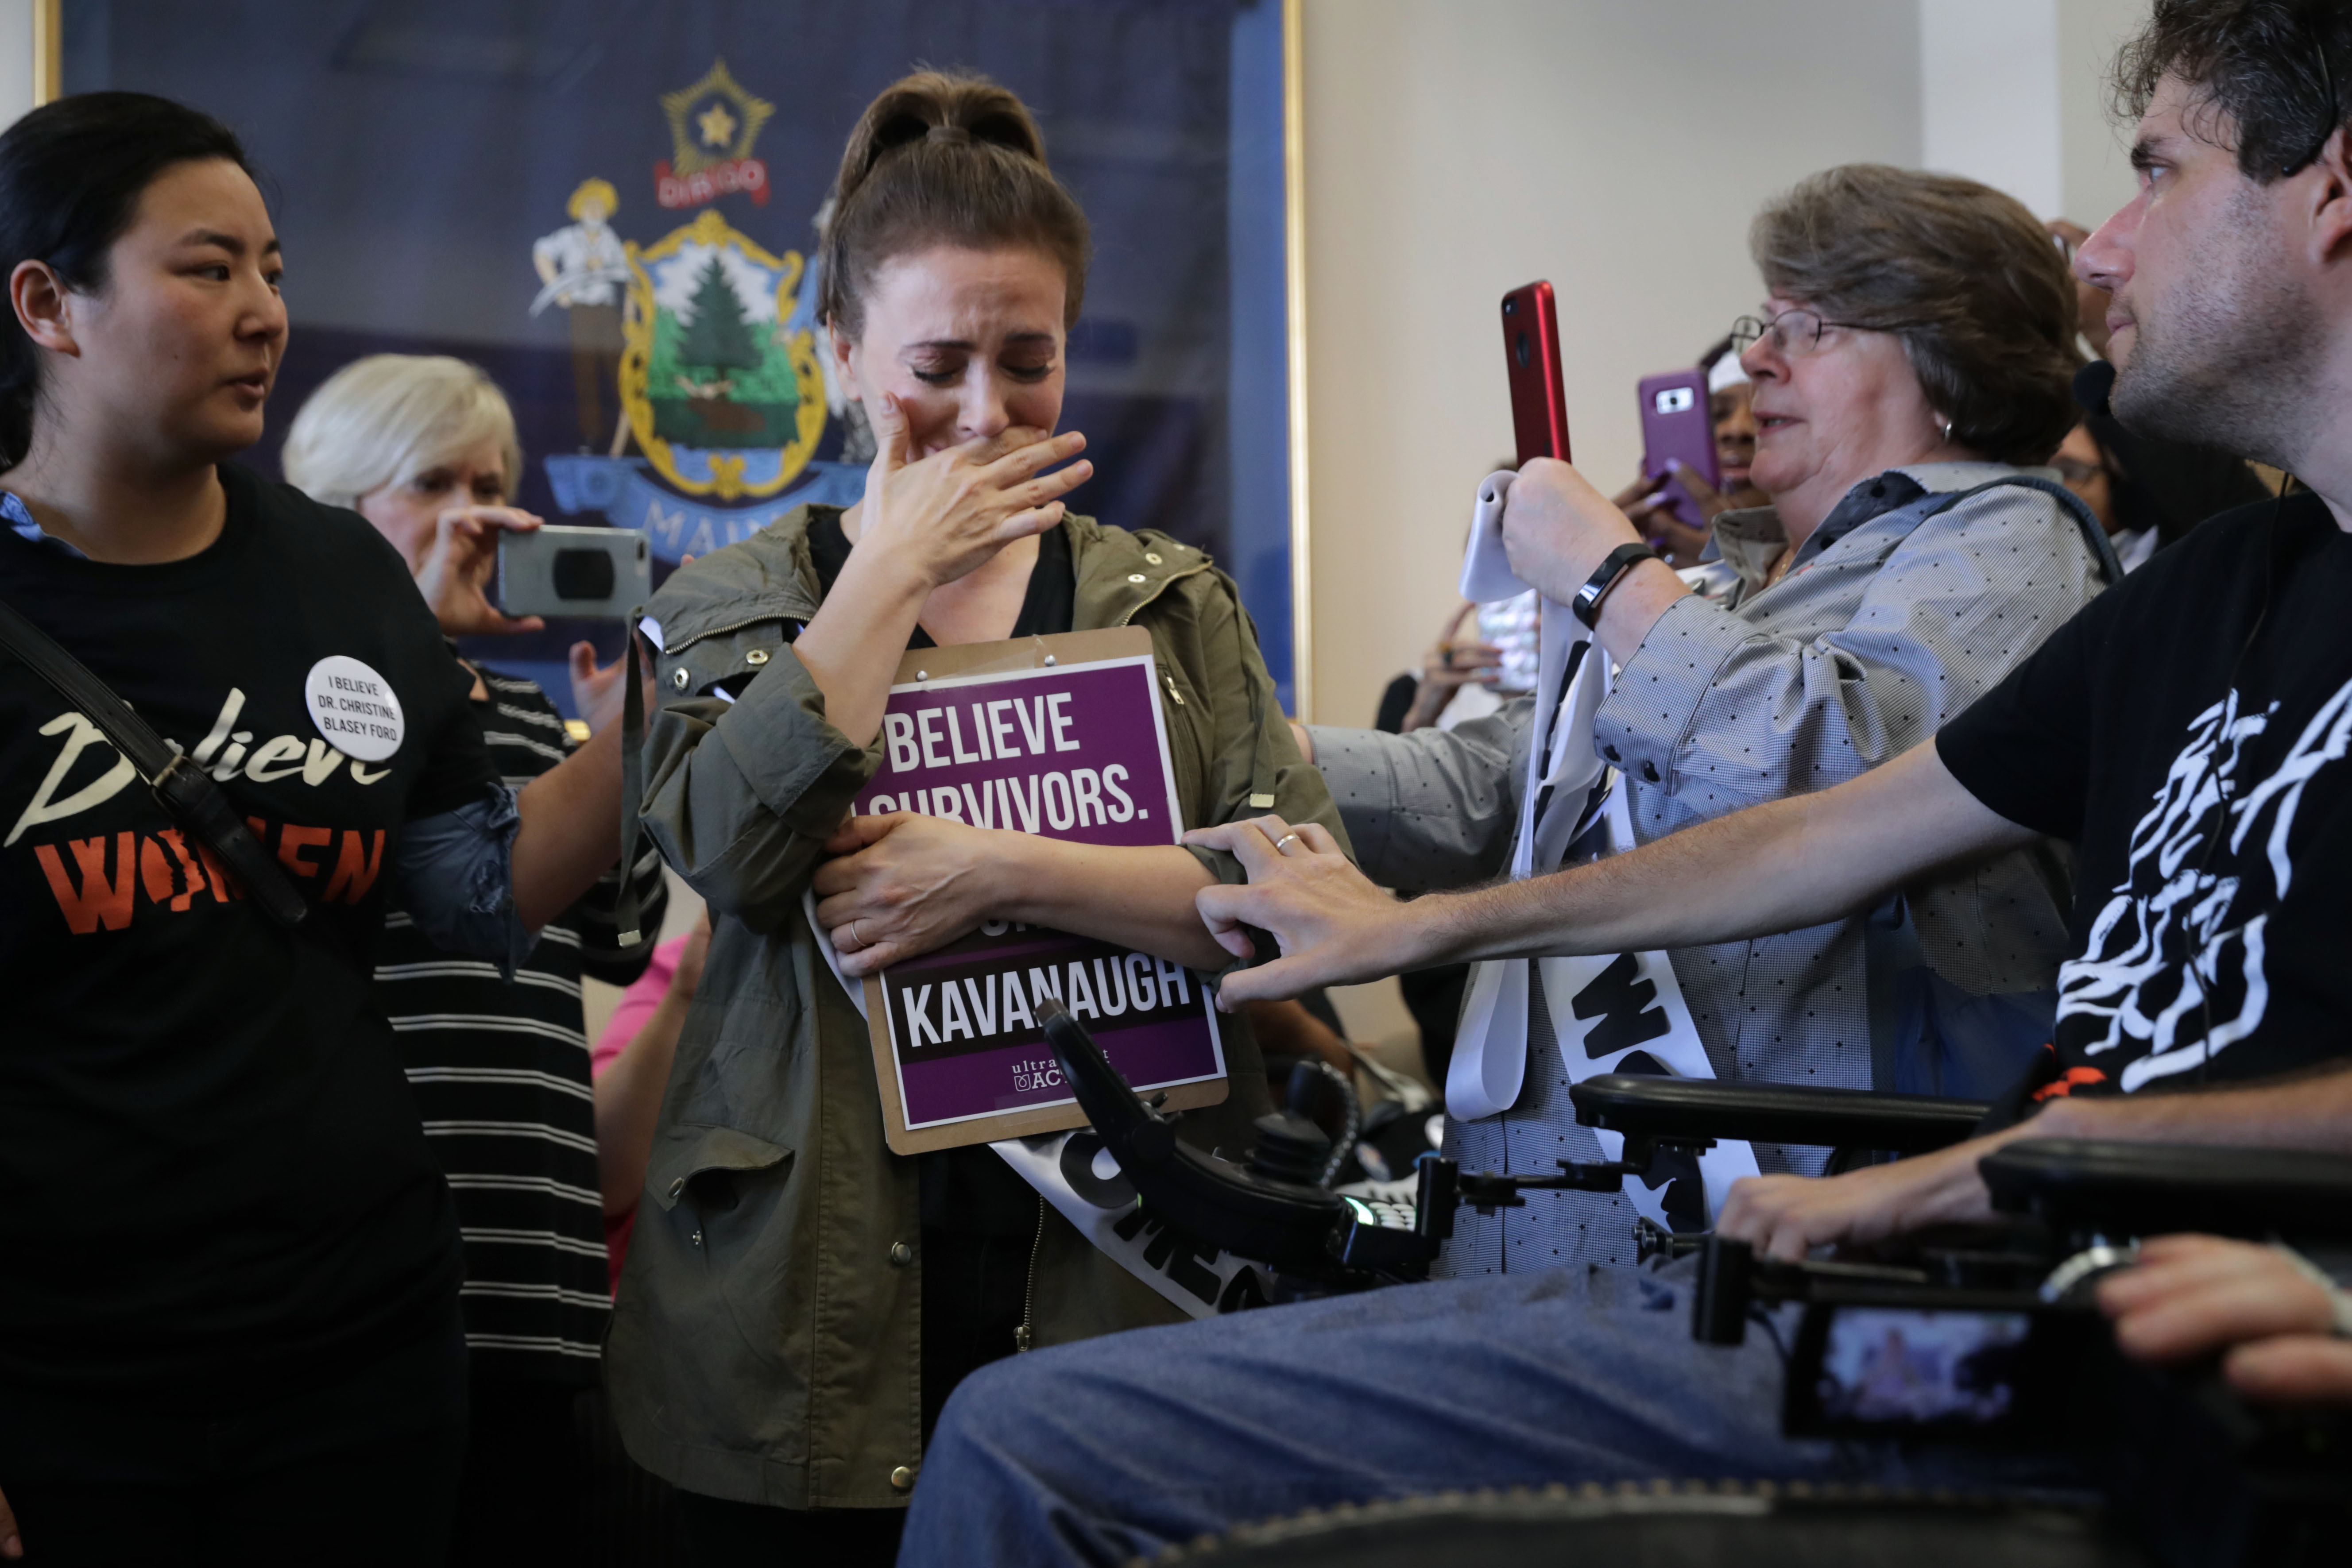 Actress Alyssa Milano is comforted after telling her story of being sexually assaulted while she and dozens of other protesters demonstrate against the appointment of Supreme Court nominee Judge Brett Kavanaugh in the office of Sen. Susan Collins in the Dirksen Senate Office Building on Capitol Hill September 26, 2018 in Washington, DC. (Photo by Chip Somodevilla/Getty Images)